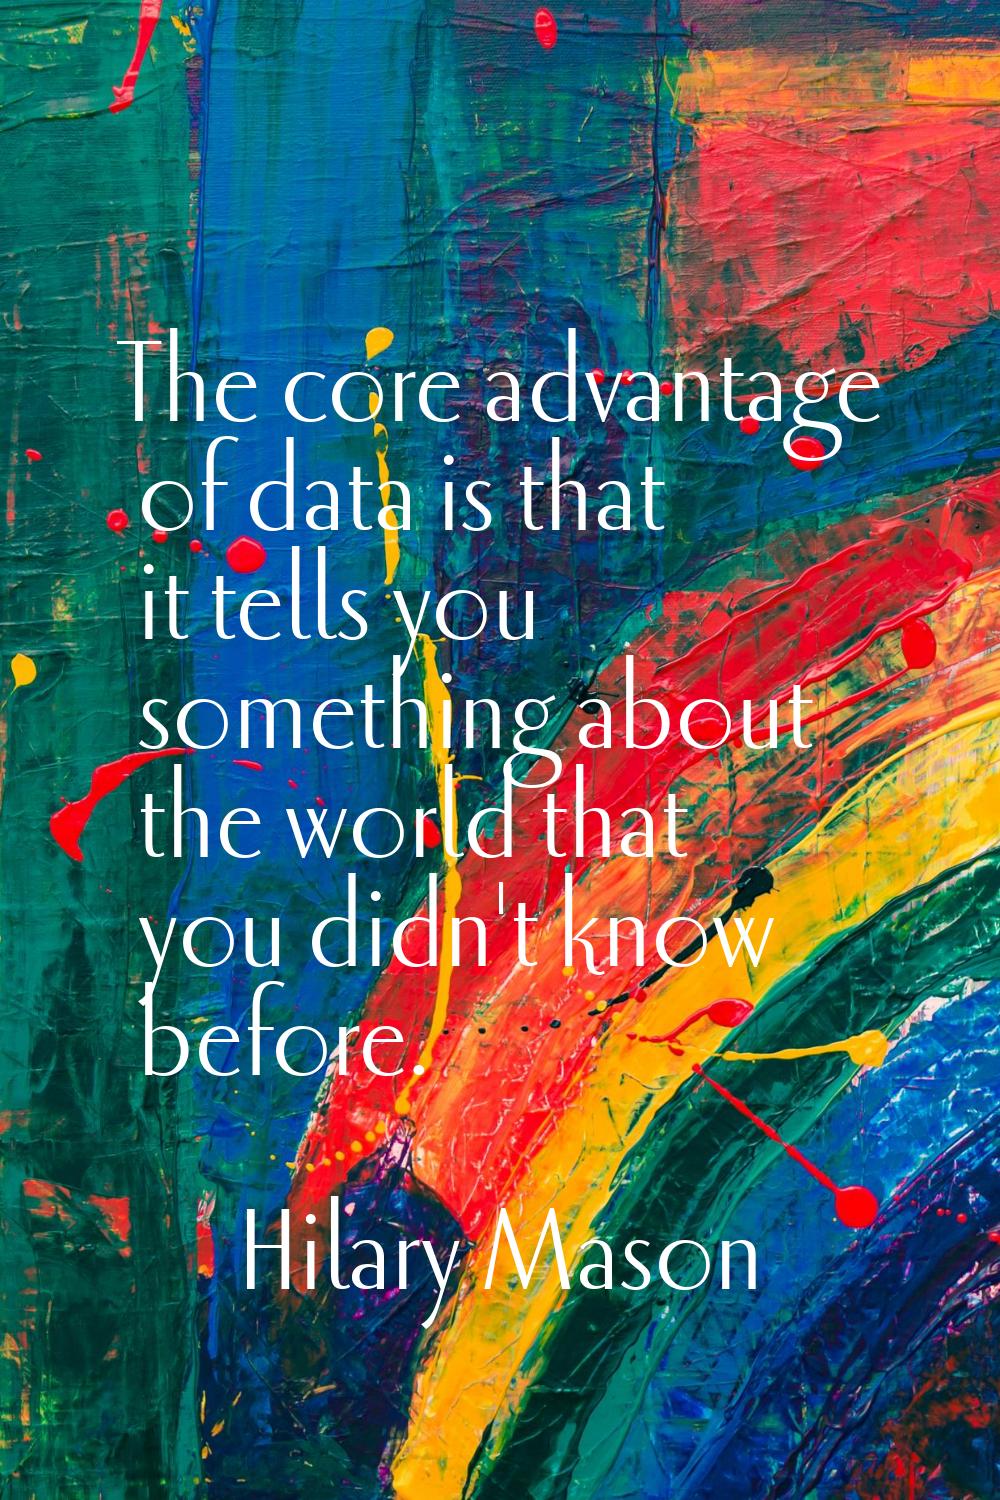 The core advantage of data is that it tells you something about the world that you didn't know befo